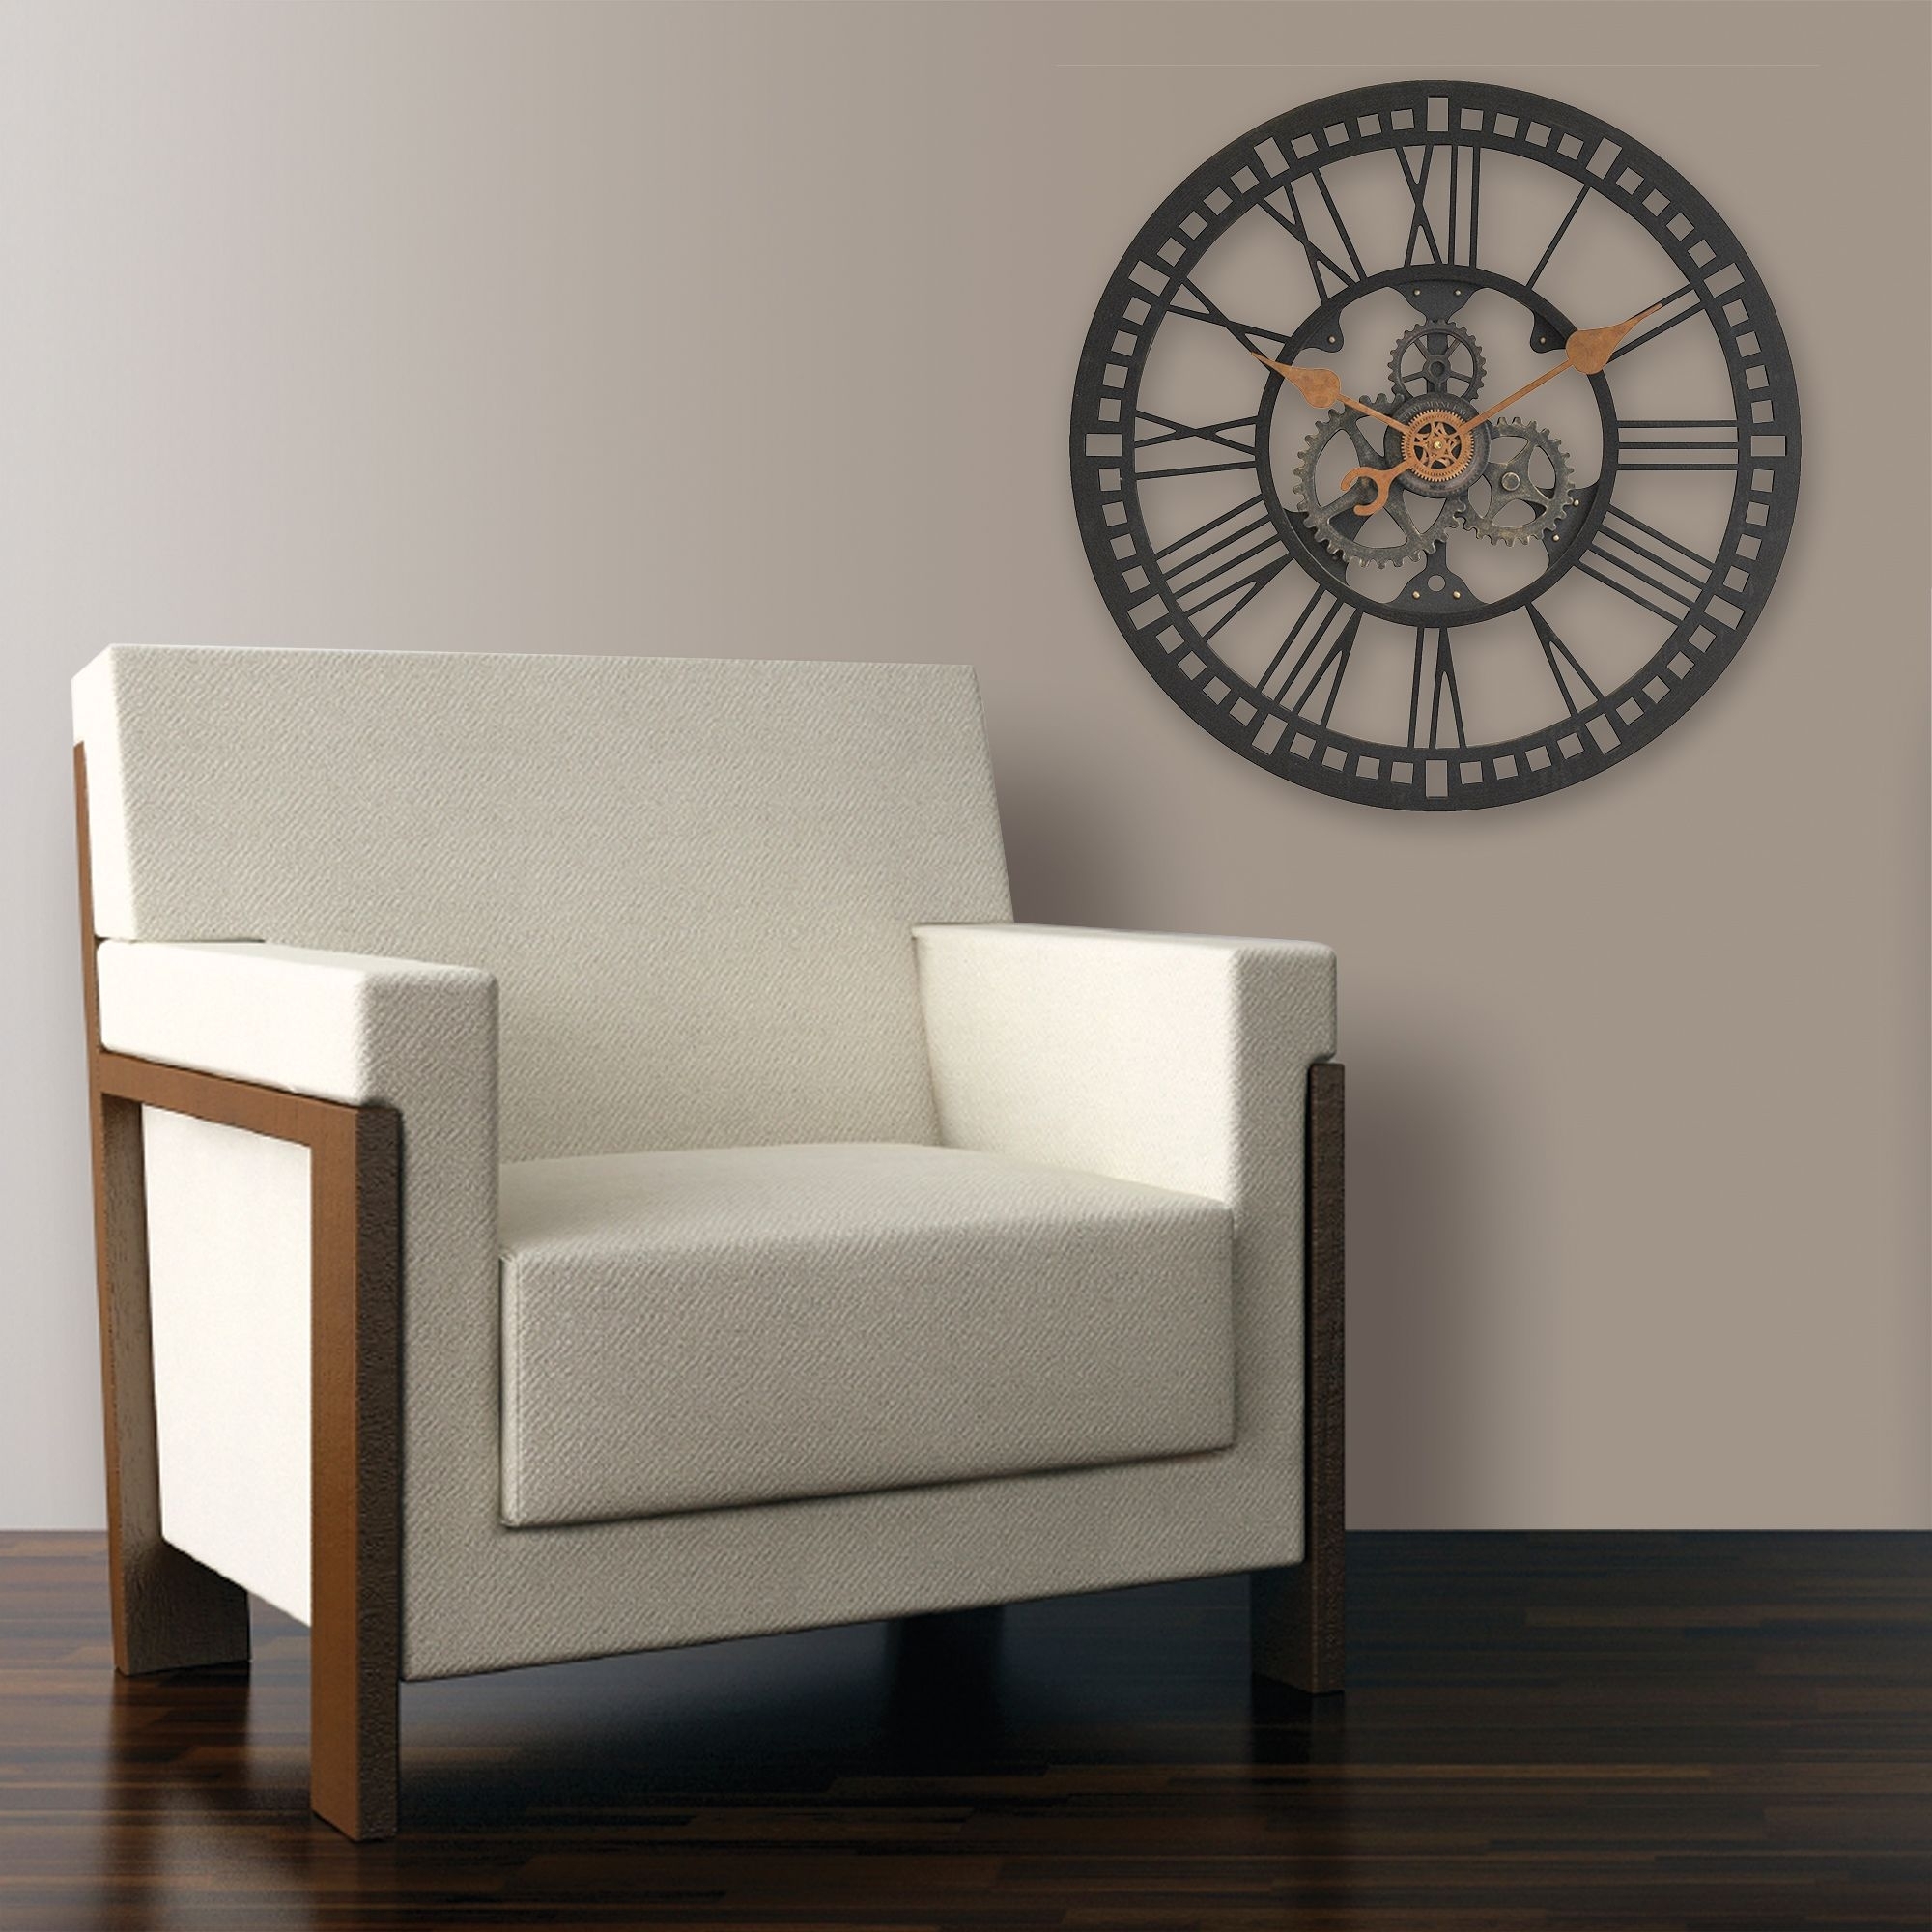  [Thicker Updated] Large Wall Clock, 30 Inch Industrial